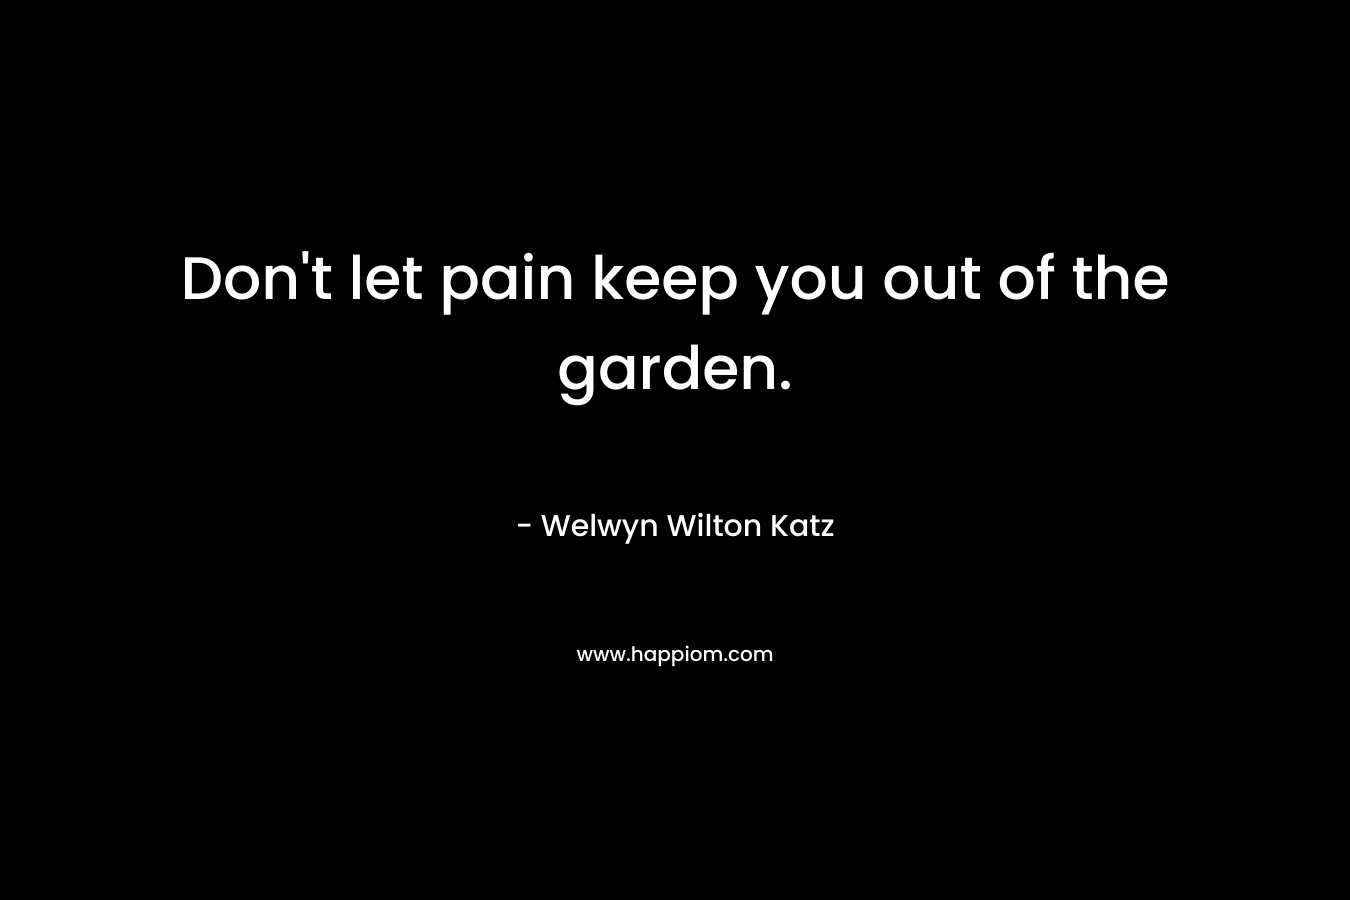 Don't let pain keep you out of the garden.